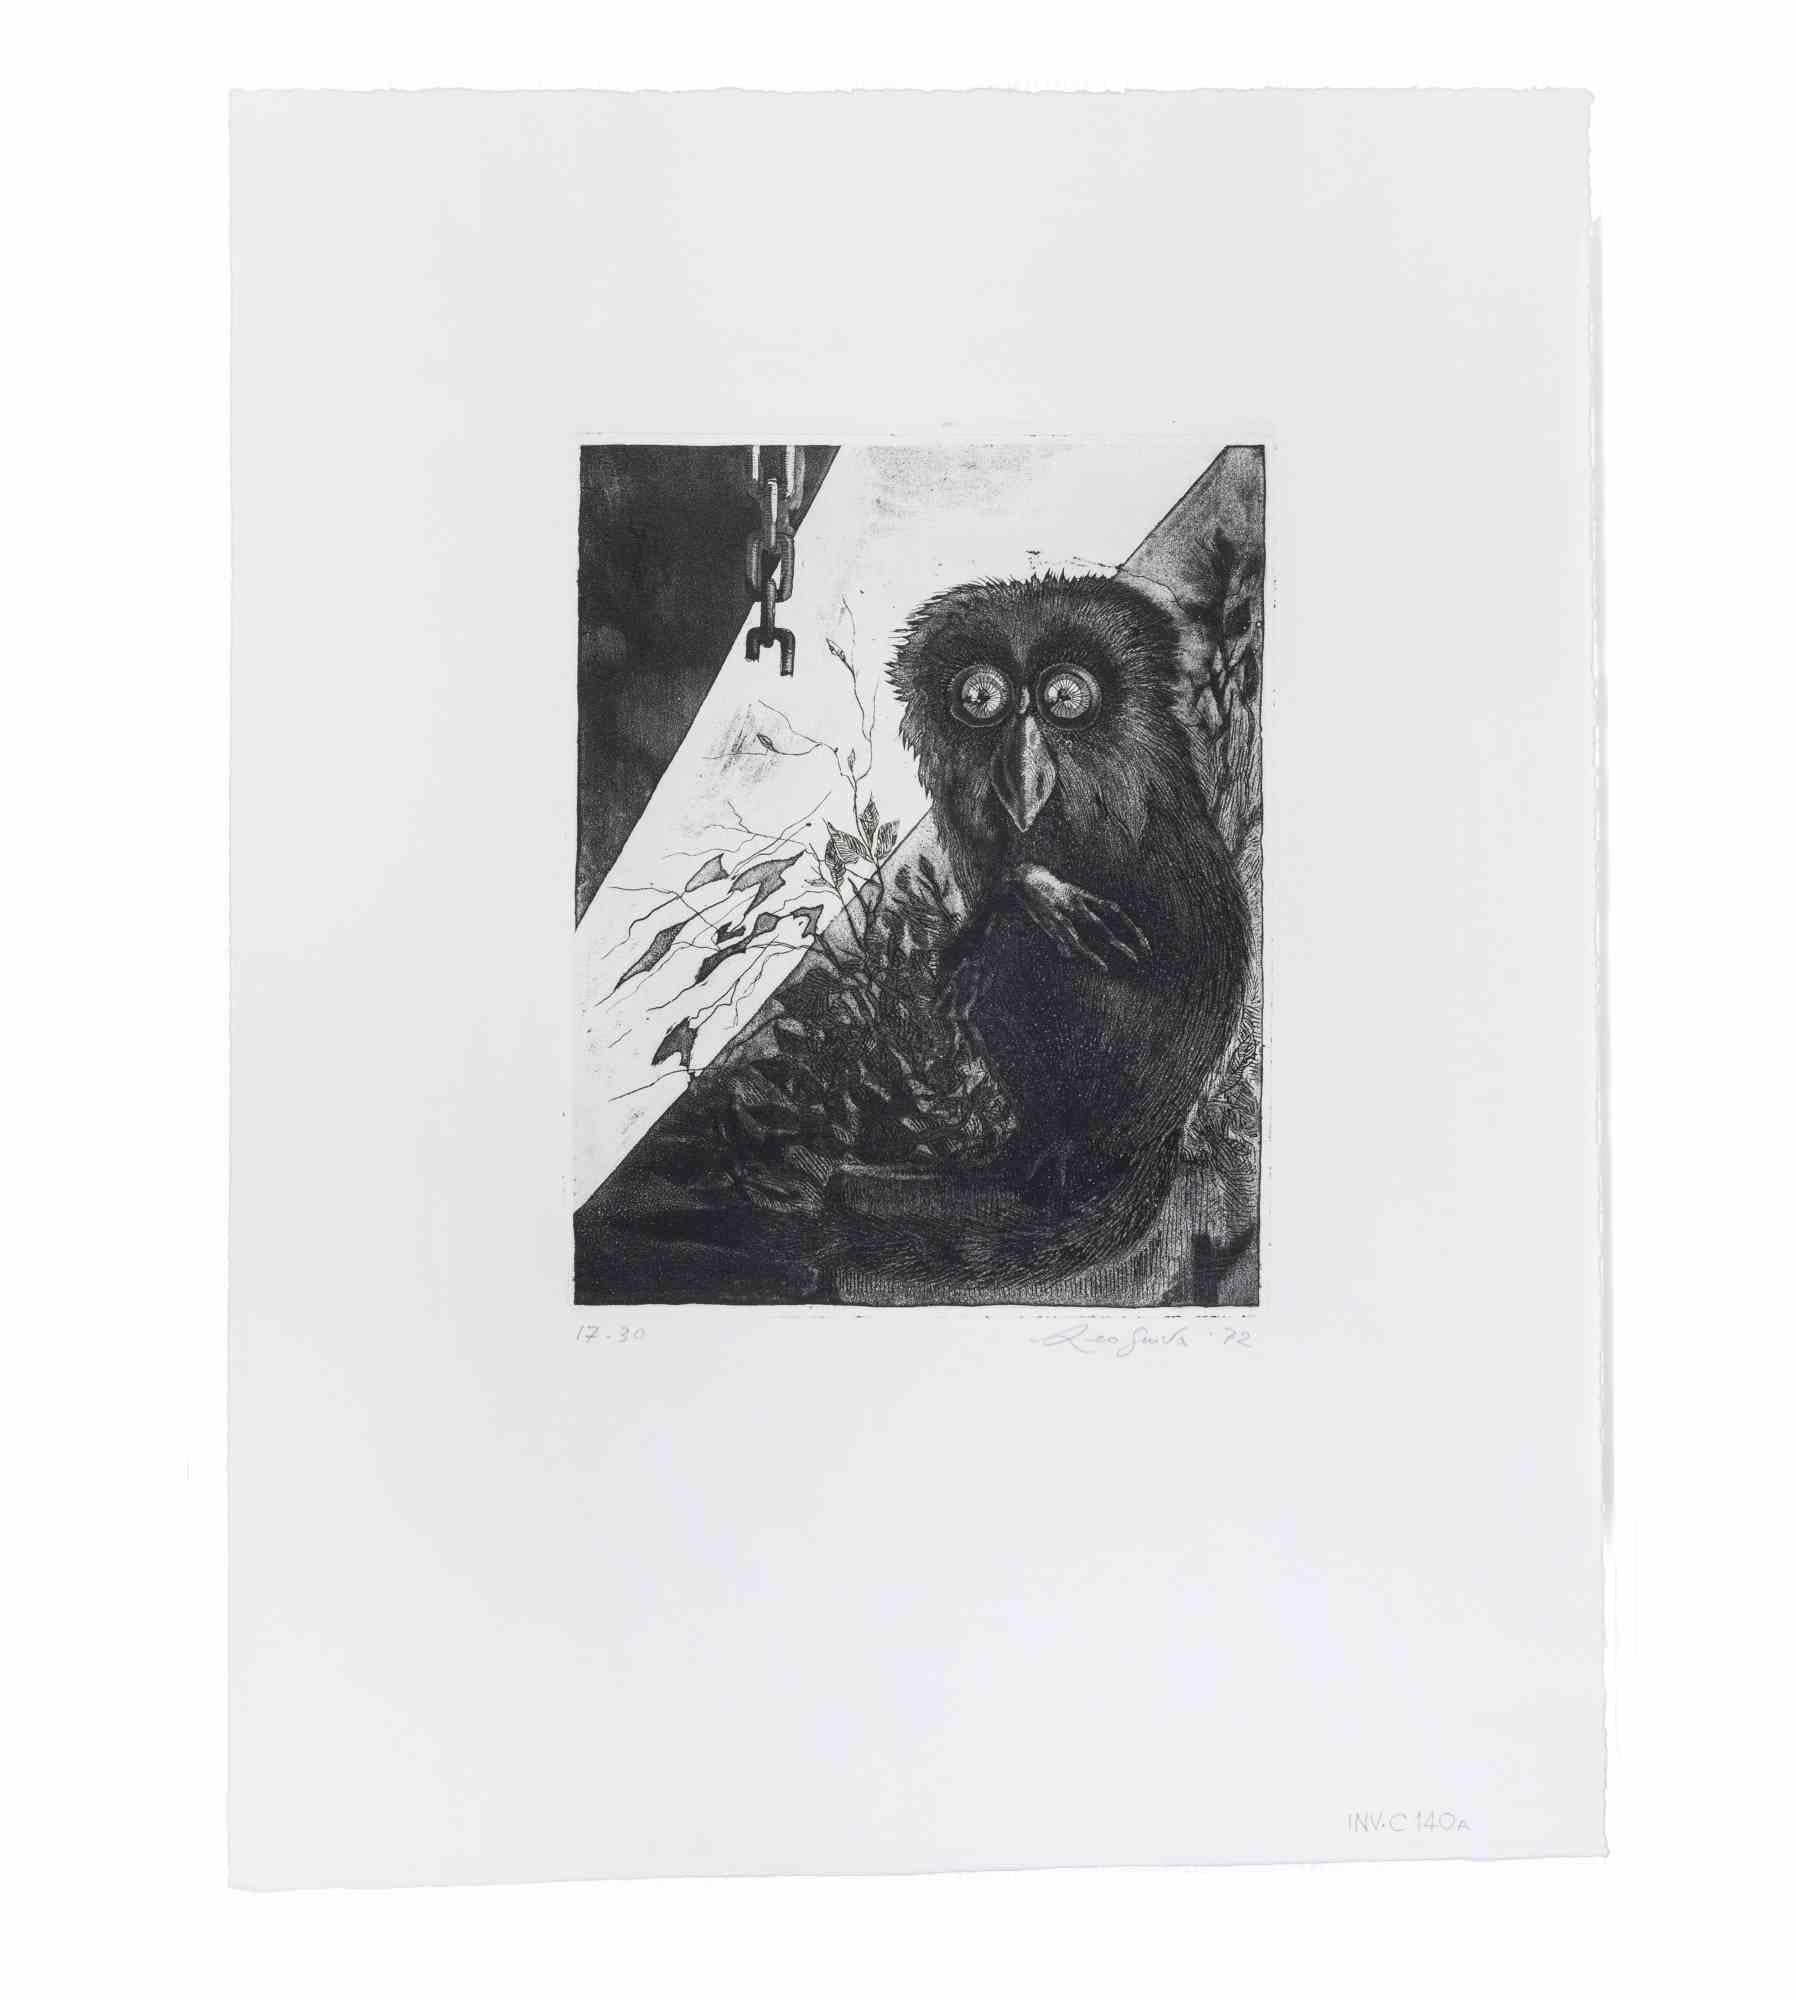 Dark Lemur is an Etching realized by Leo Guida in 1972s.

Good condition, Hand signed, dated with pencil.

Artist sensitive to current issues, artistic movements and historical techniques, Leo Guida has been able to weave a productive interview on